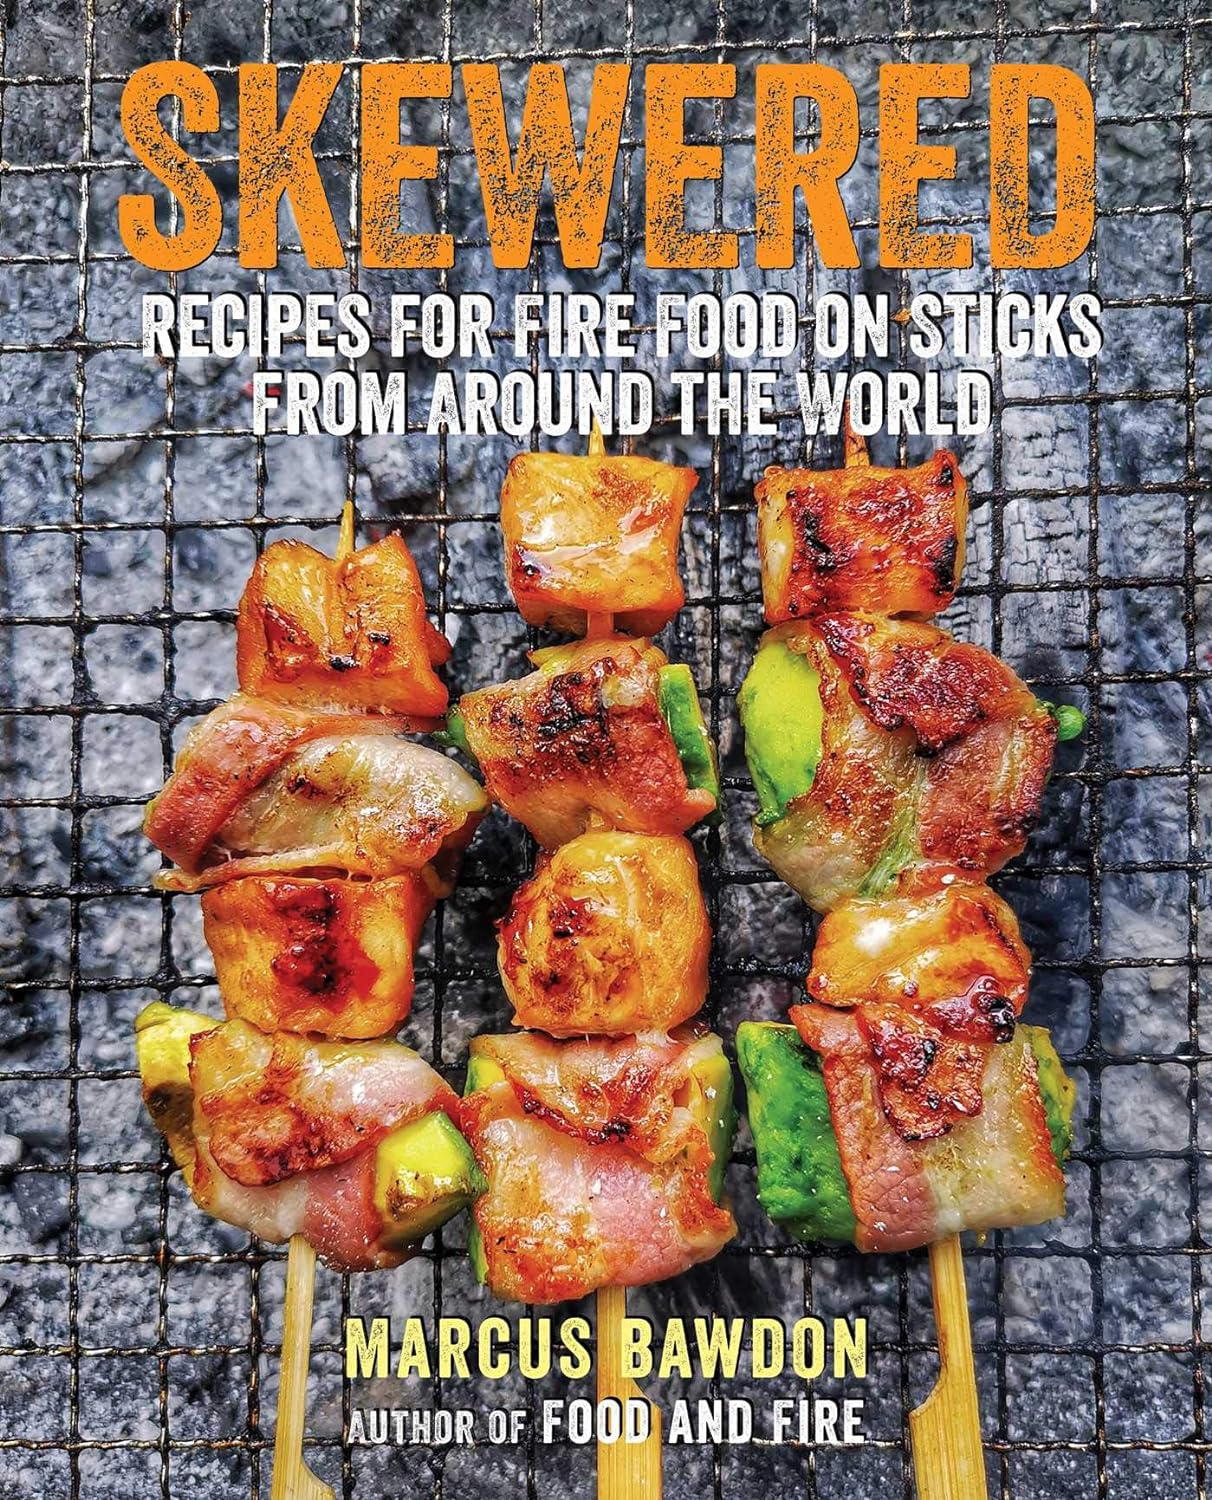 Skewered: Recipes for Fire Food on Sticks from Around the World (Marcus Bawdon)